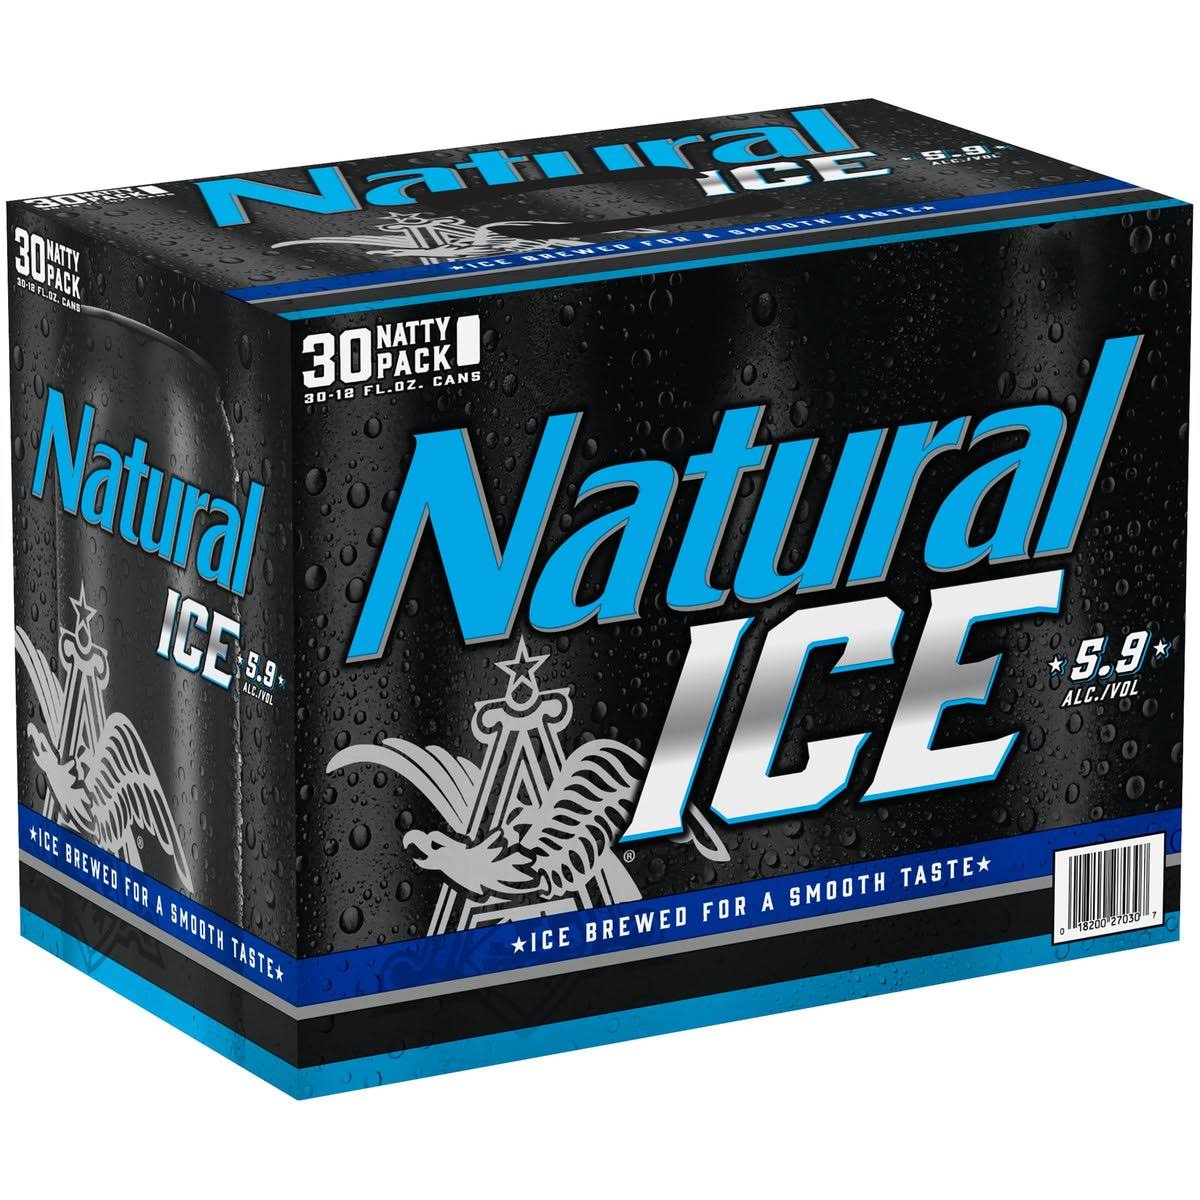 Natural Ice Lager - 30 pack, 12 fl oz cans